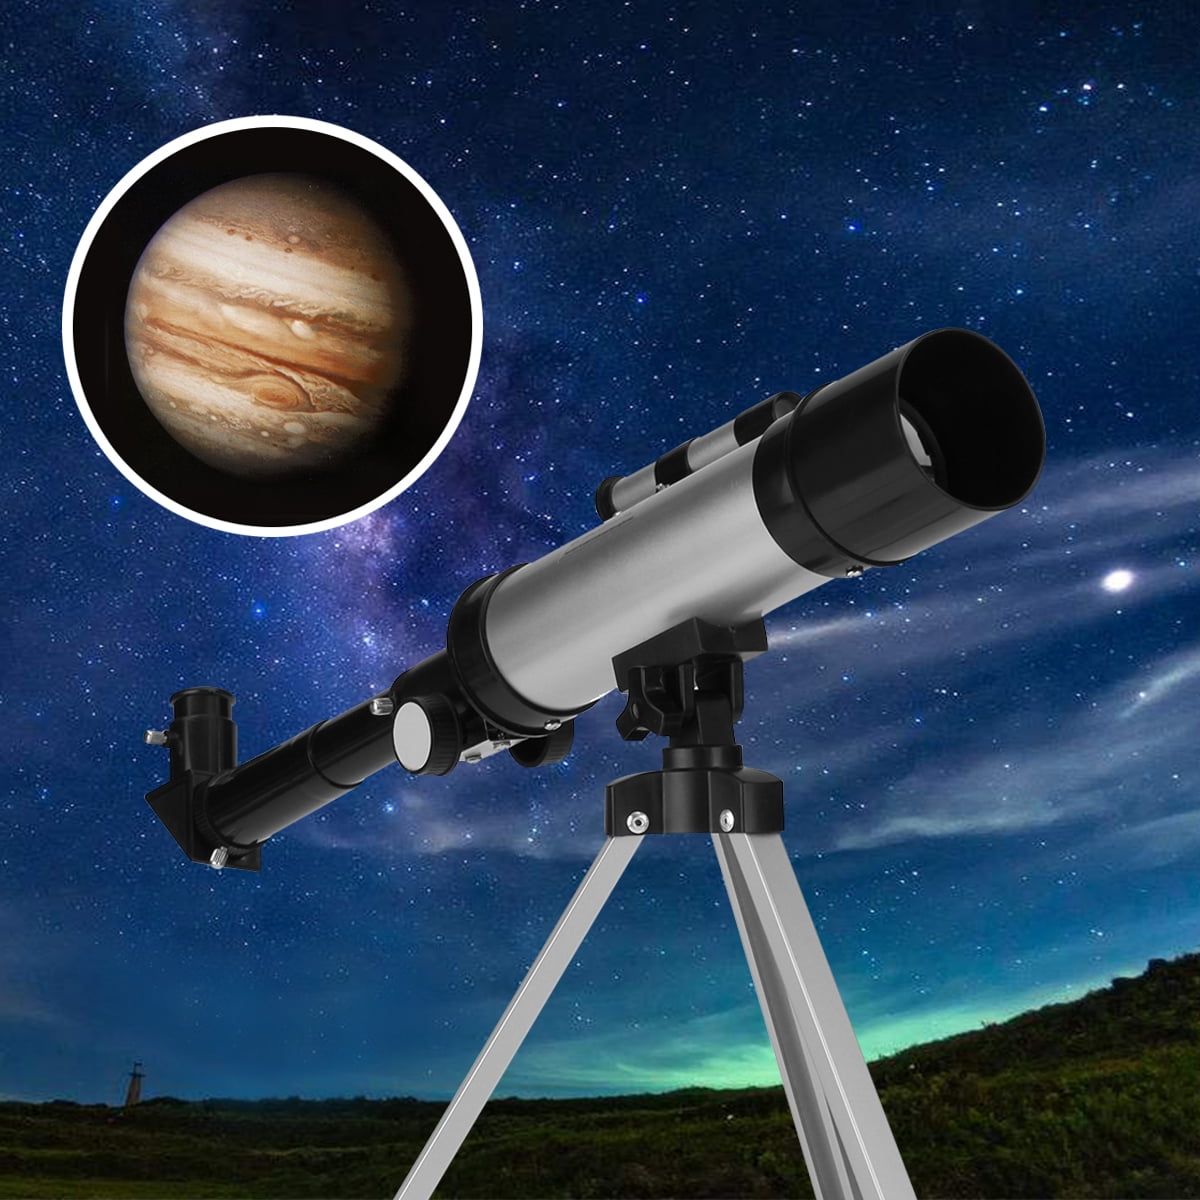 Coupondeal Science Telescope for Kids 360/50mm Refractive Astronomical Telescope Tripod Monocula Space Scope Refractor for Astronomy Beginners Portable Telescope for Children 